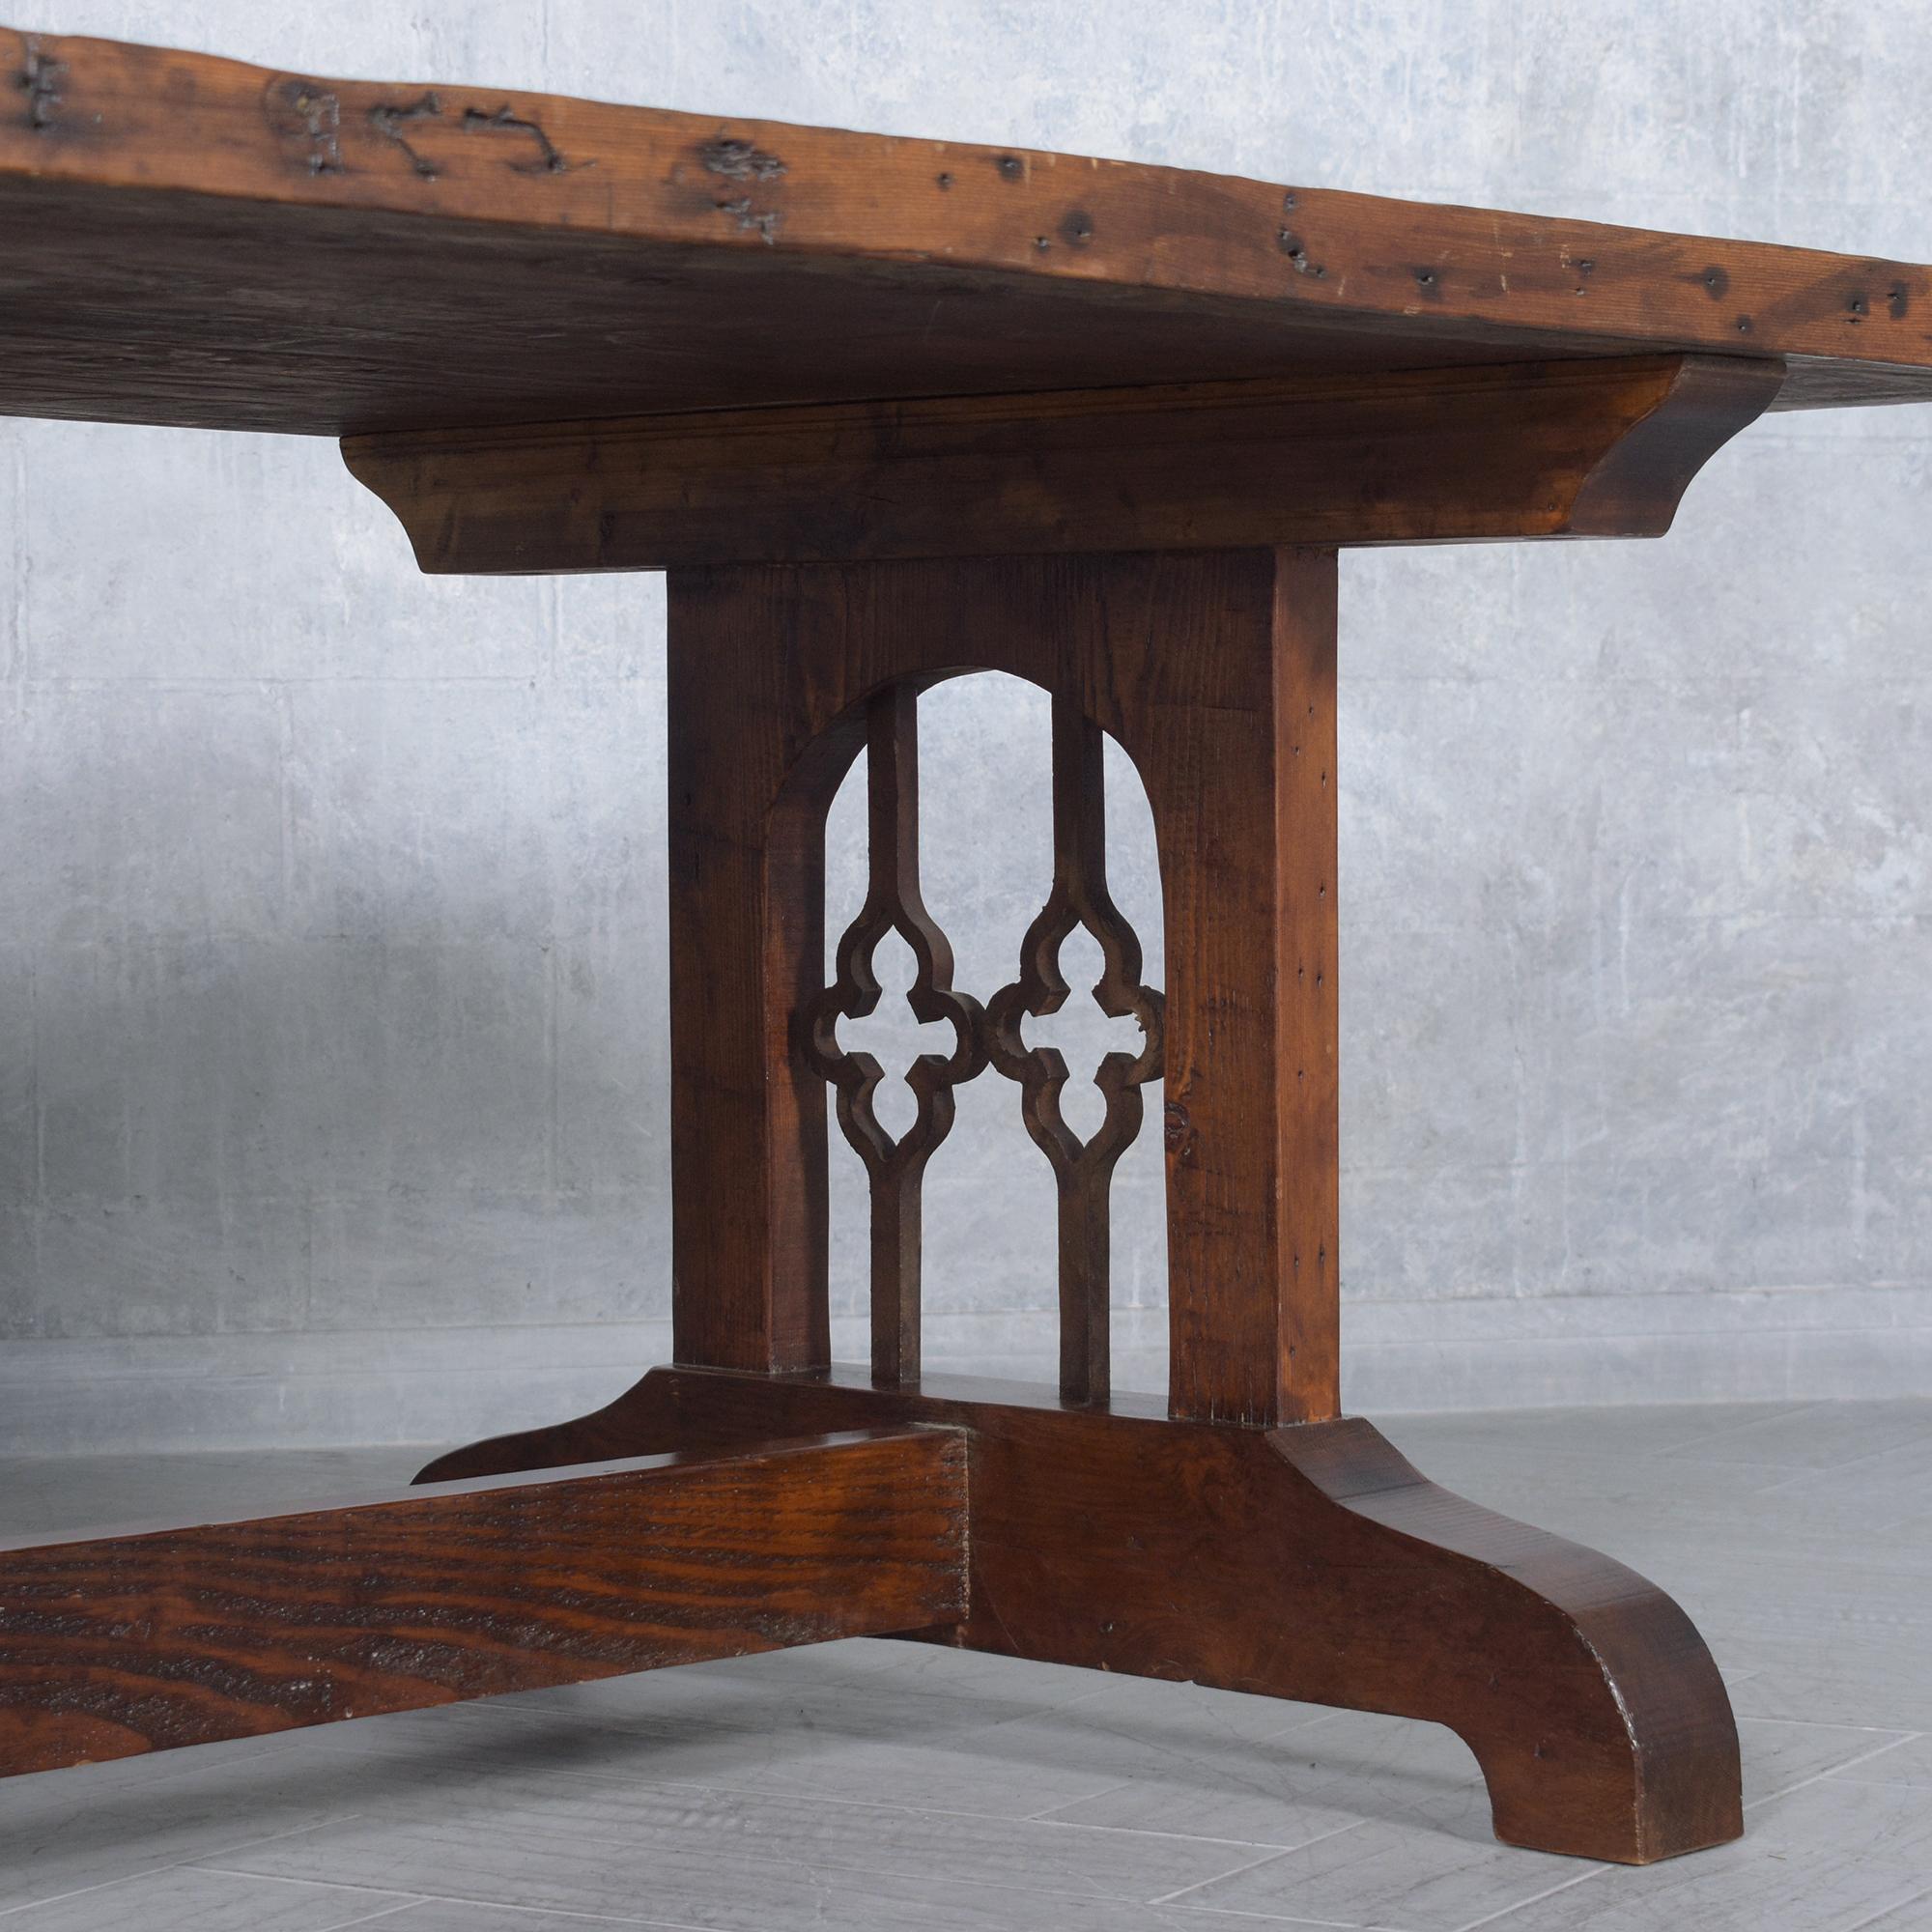 Mid-20th Century Vintage Solid Wood Dining Table with Iron Accents and Pedestal Legs For Sale